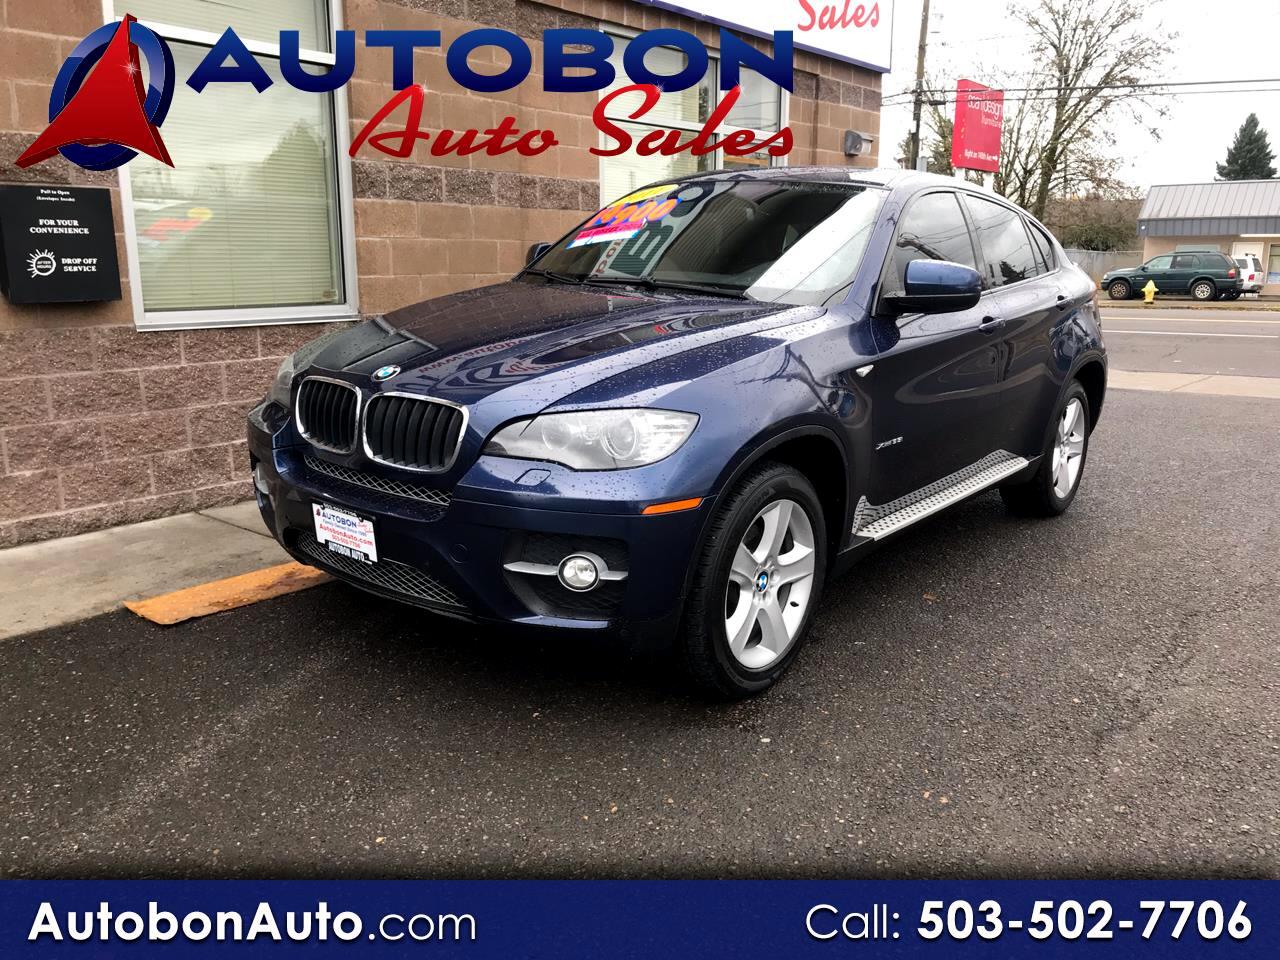 Used 2011 Bmw X6 Awd 4dr 35i For Sale In Portland Or 97233 Autobon